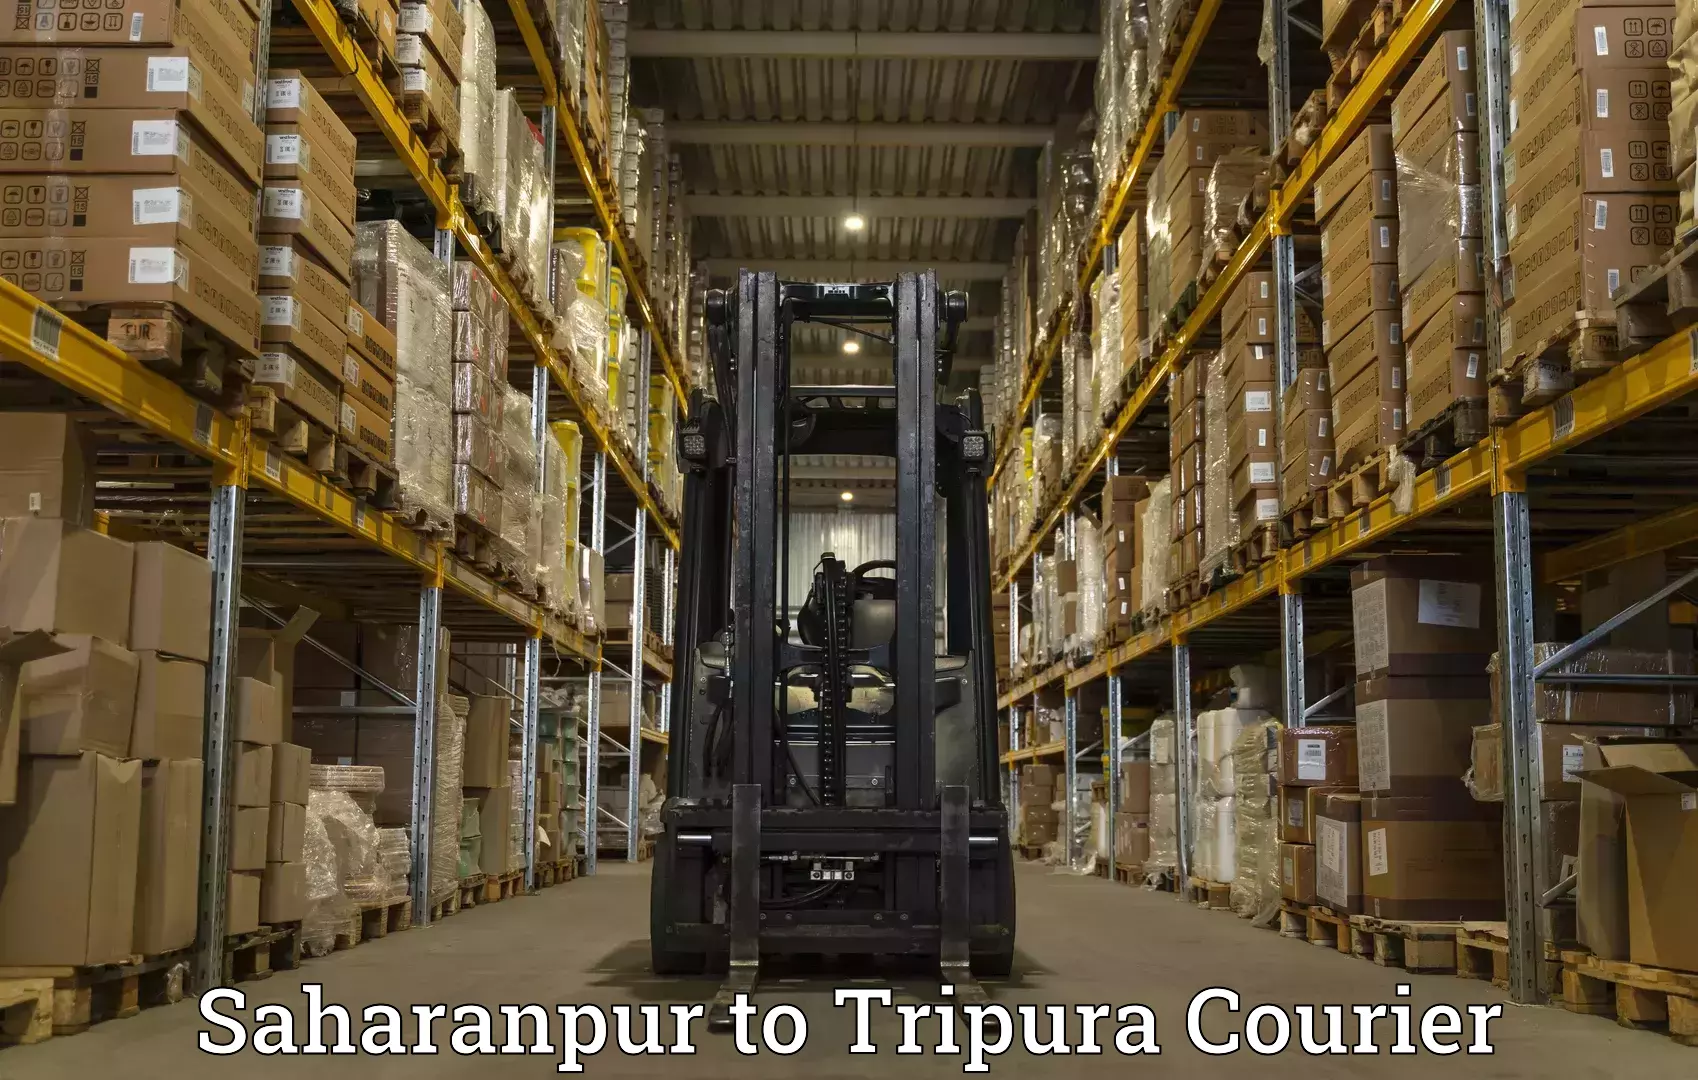 Courier service efficiency Saharanpur to Udaipur Tripura